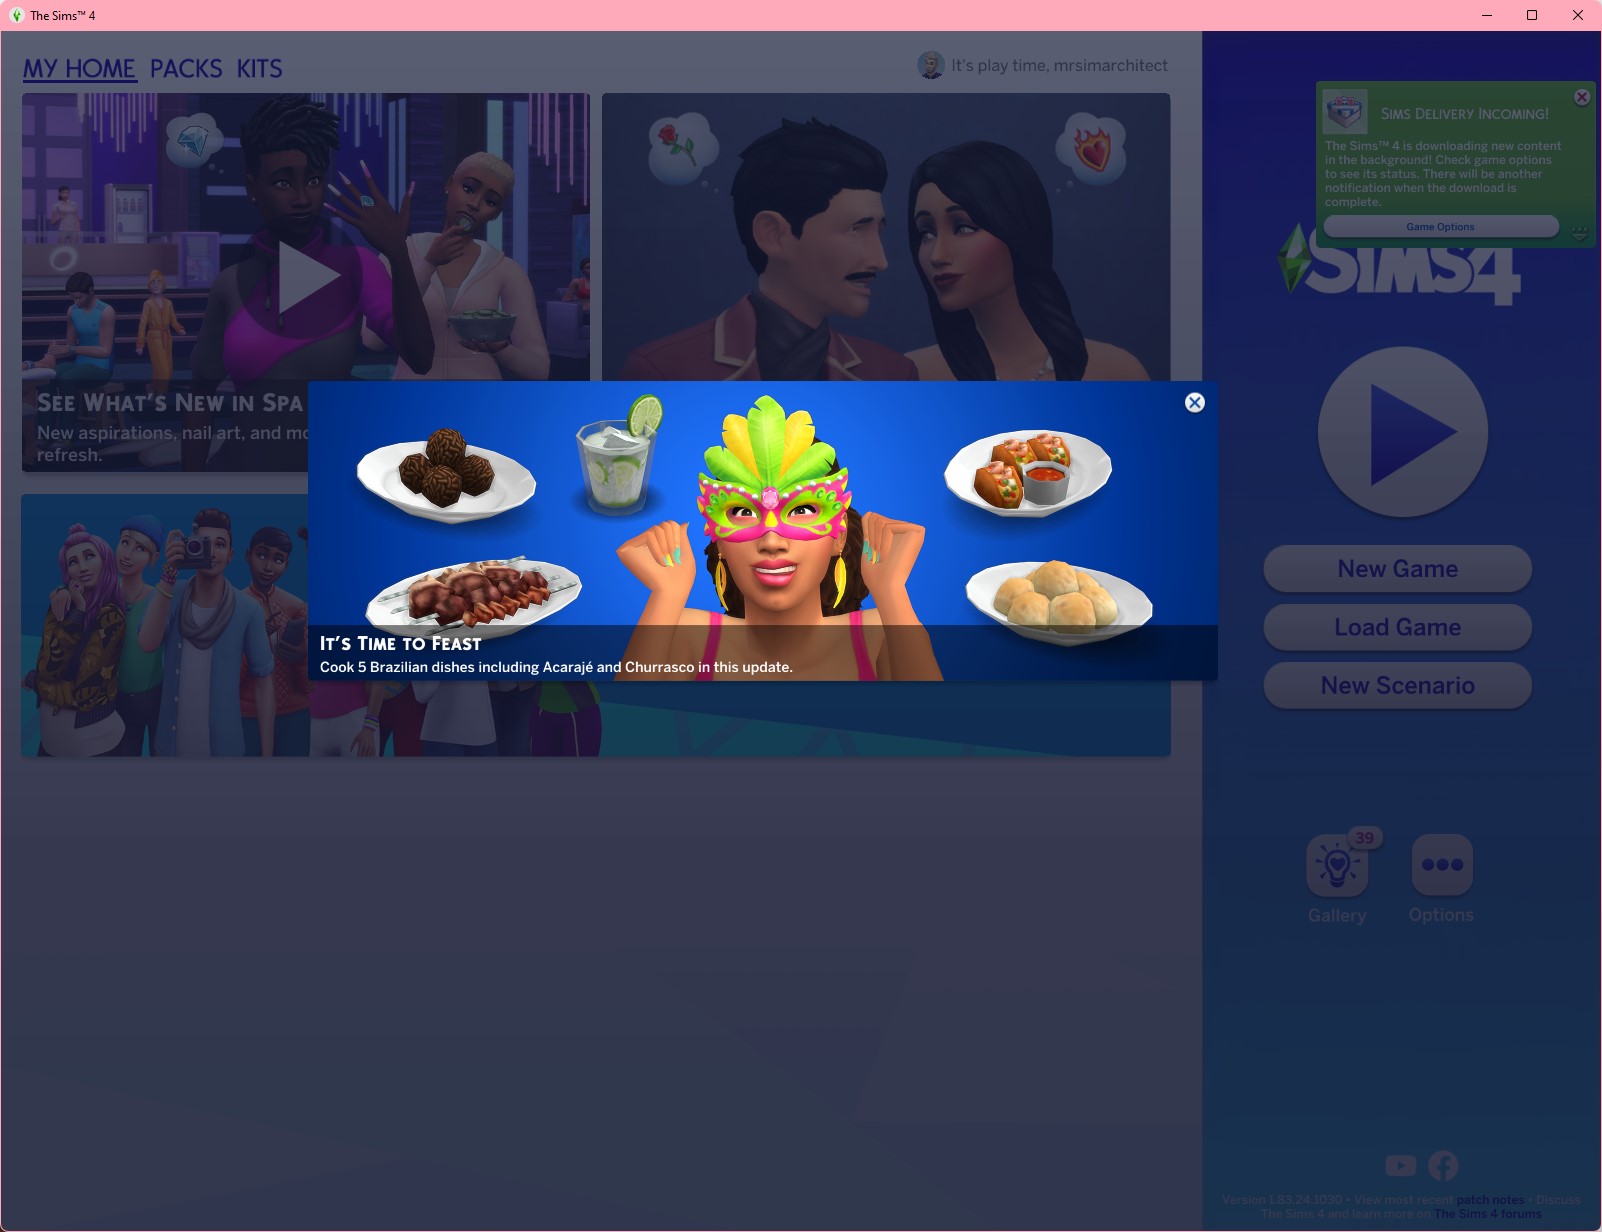 New Sims Delivery Express with Churrasco and Acaraje - Click on "No, Keep Playing"...